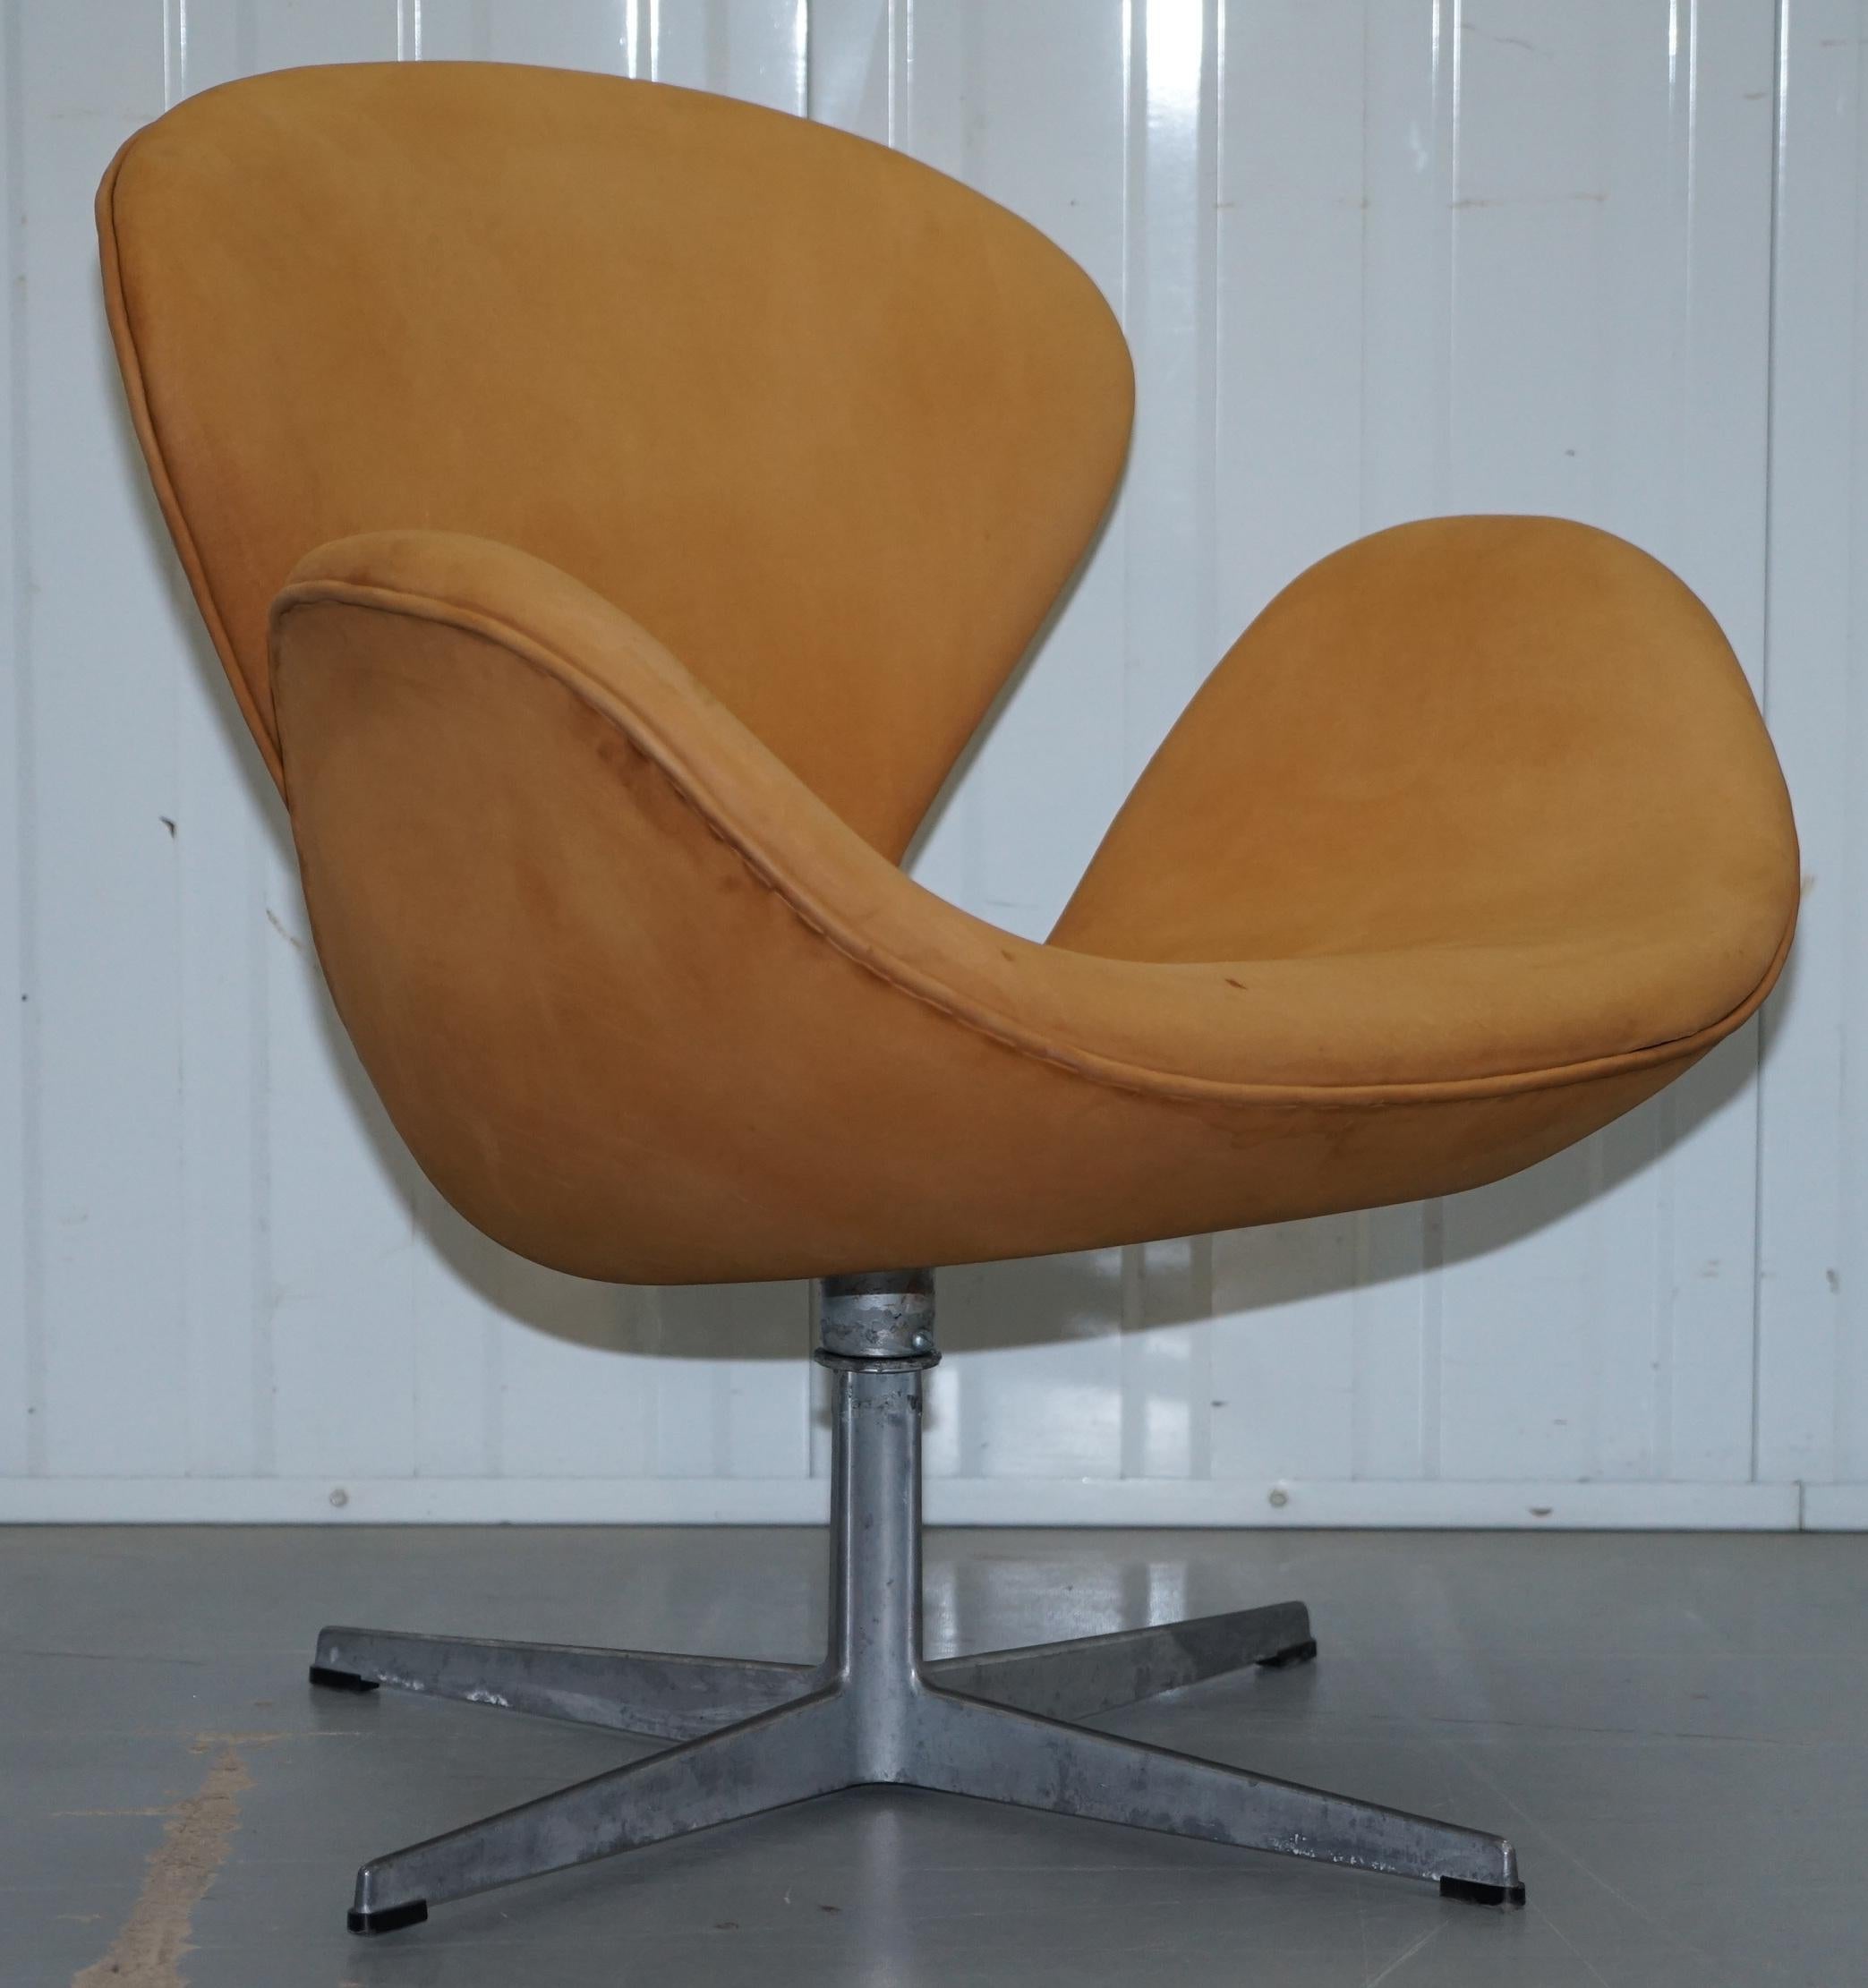 Wimbledon-Furniture
Wimbledon-Furniture is delighted to offer for sale this very rare original 1976 Fritz Hansen Swan armchair with matching Egg stool in brown suede leather 
Please note the delivery fee listed is just a guide, it covers within the